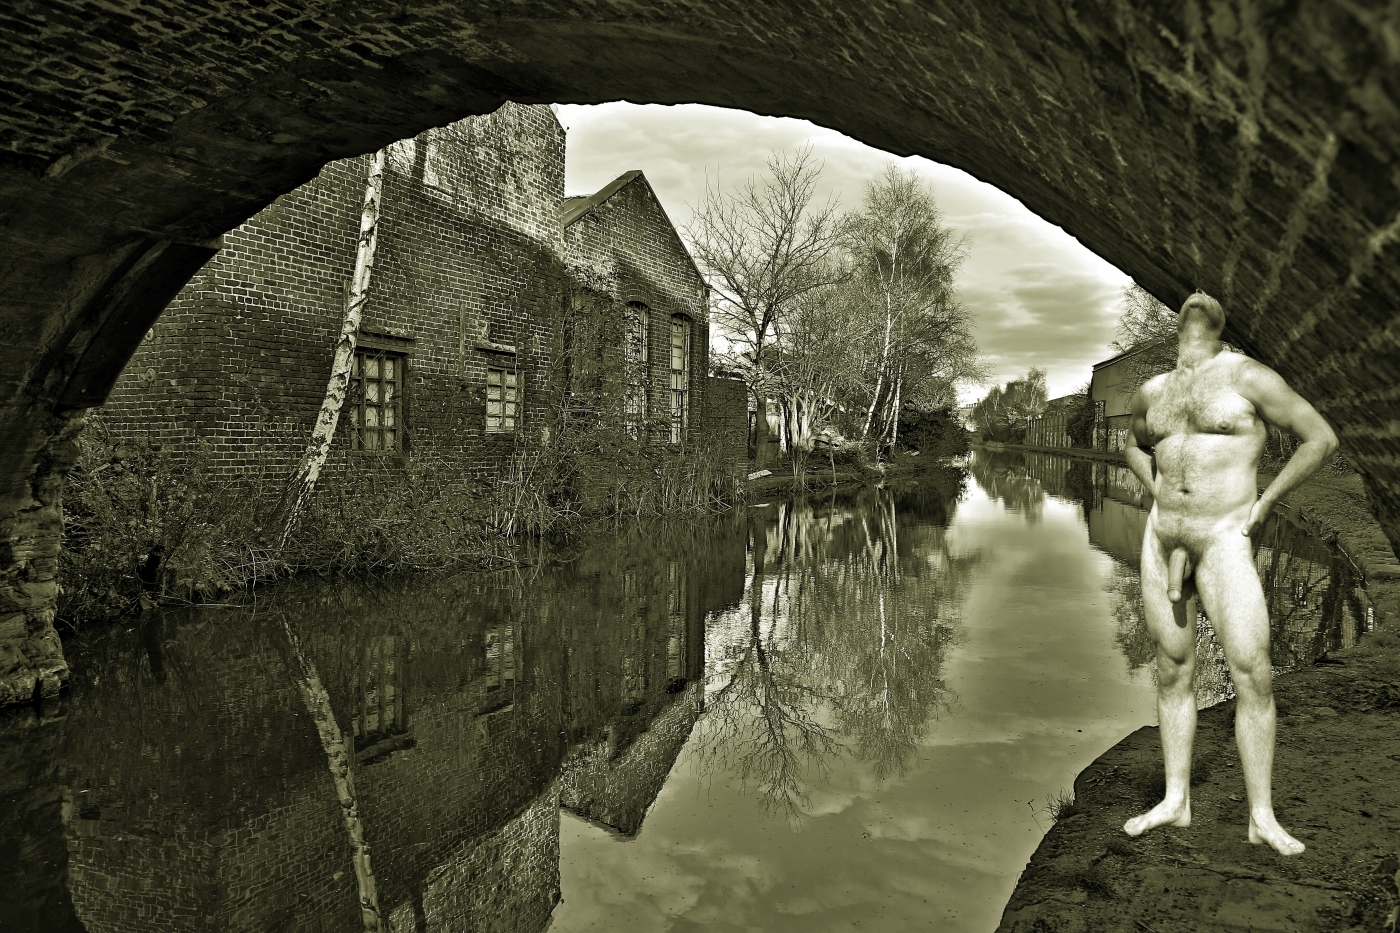 photographer davidjames64 body parts  photo. on the towpath of the canal.